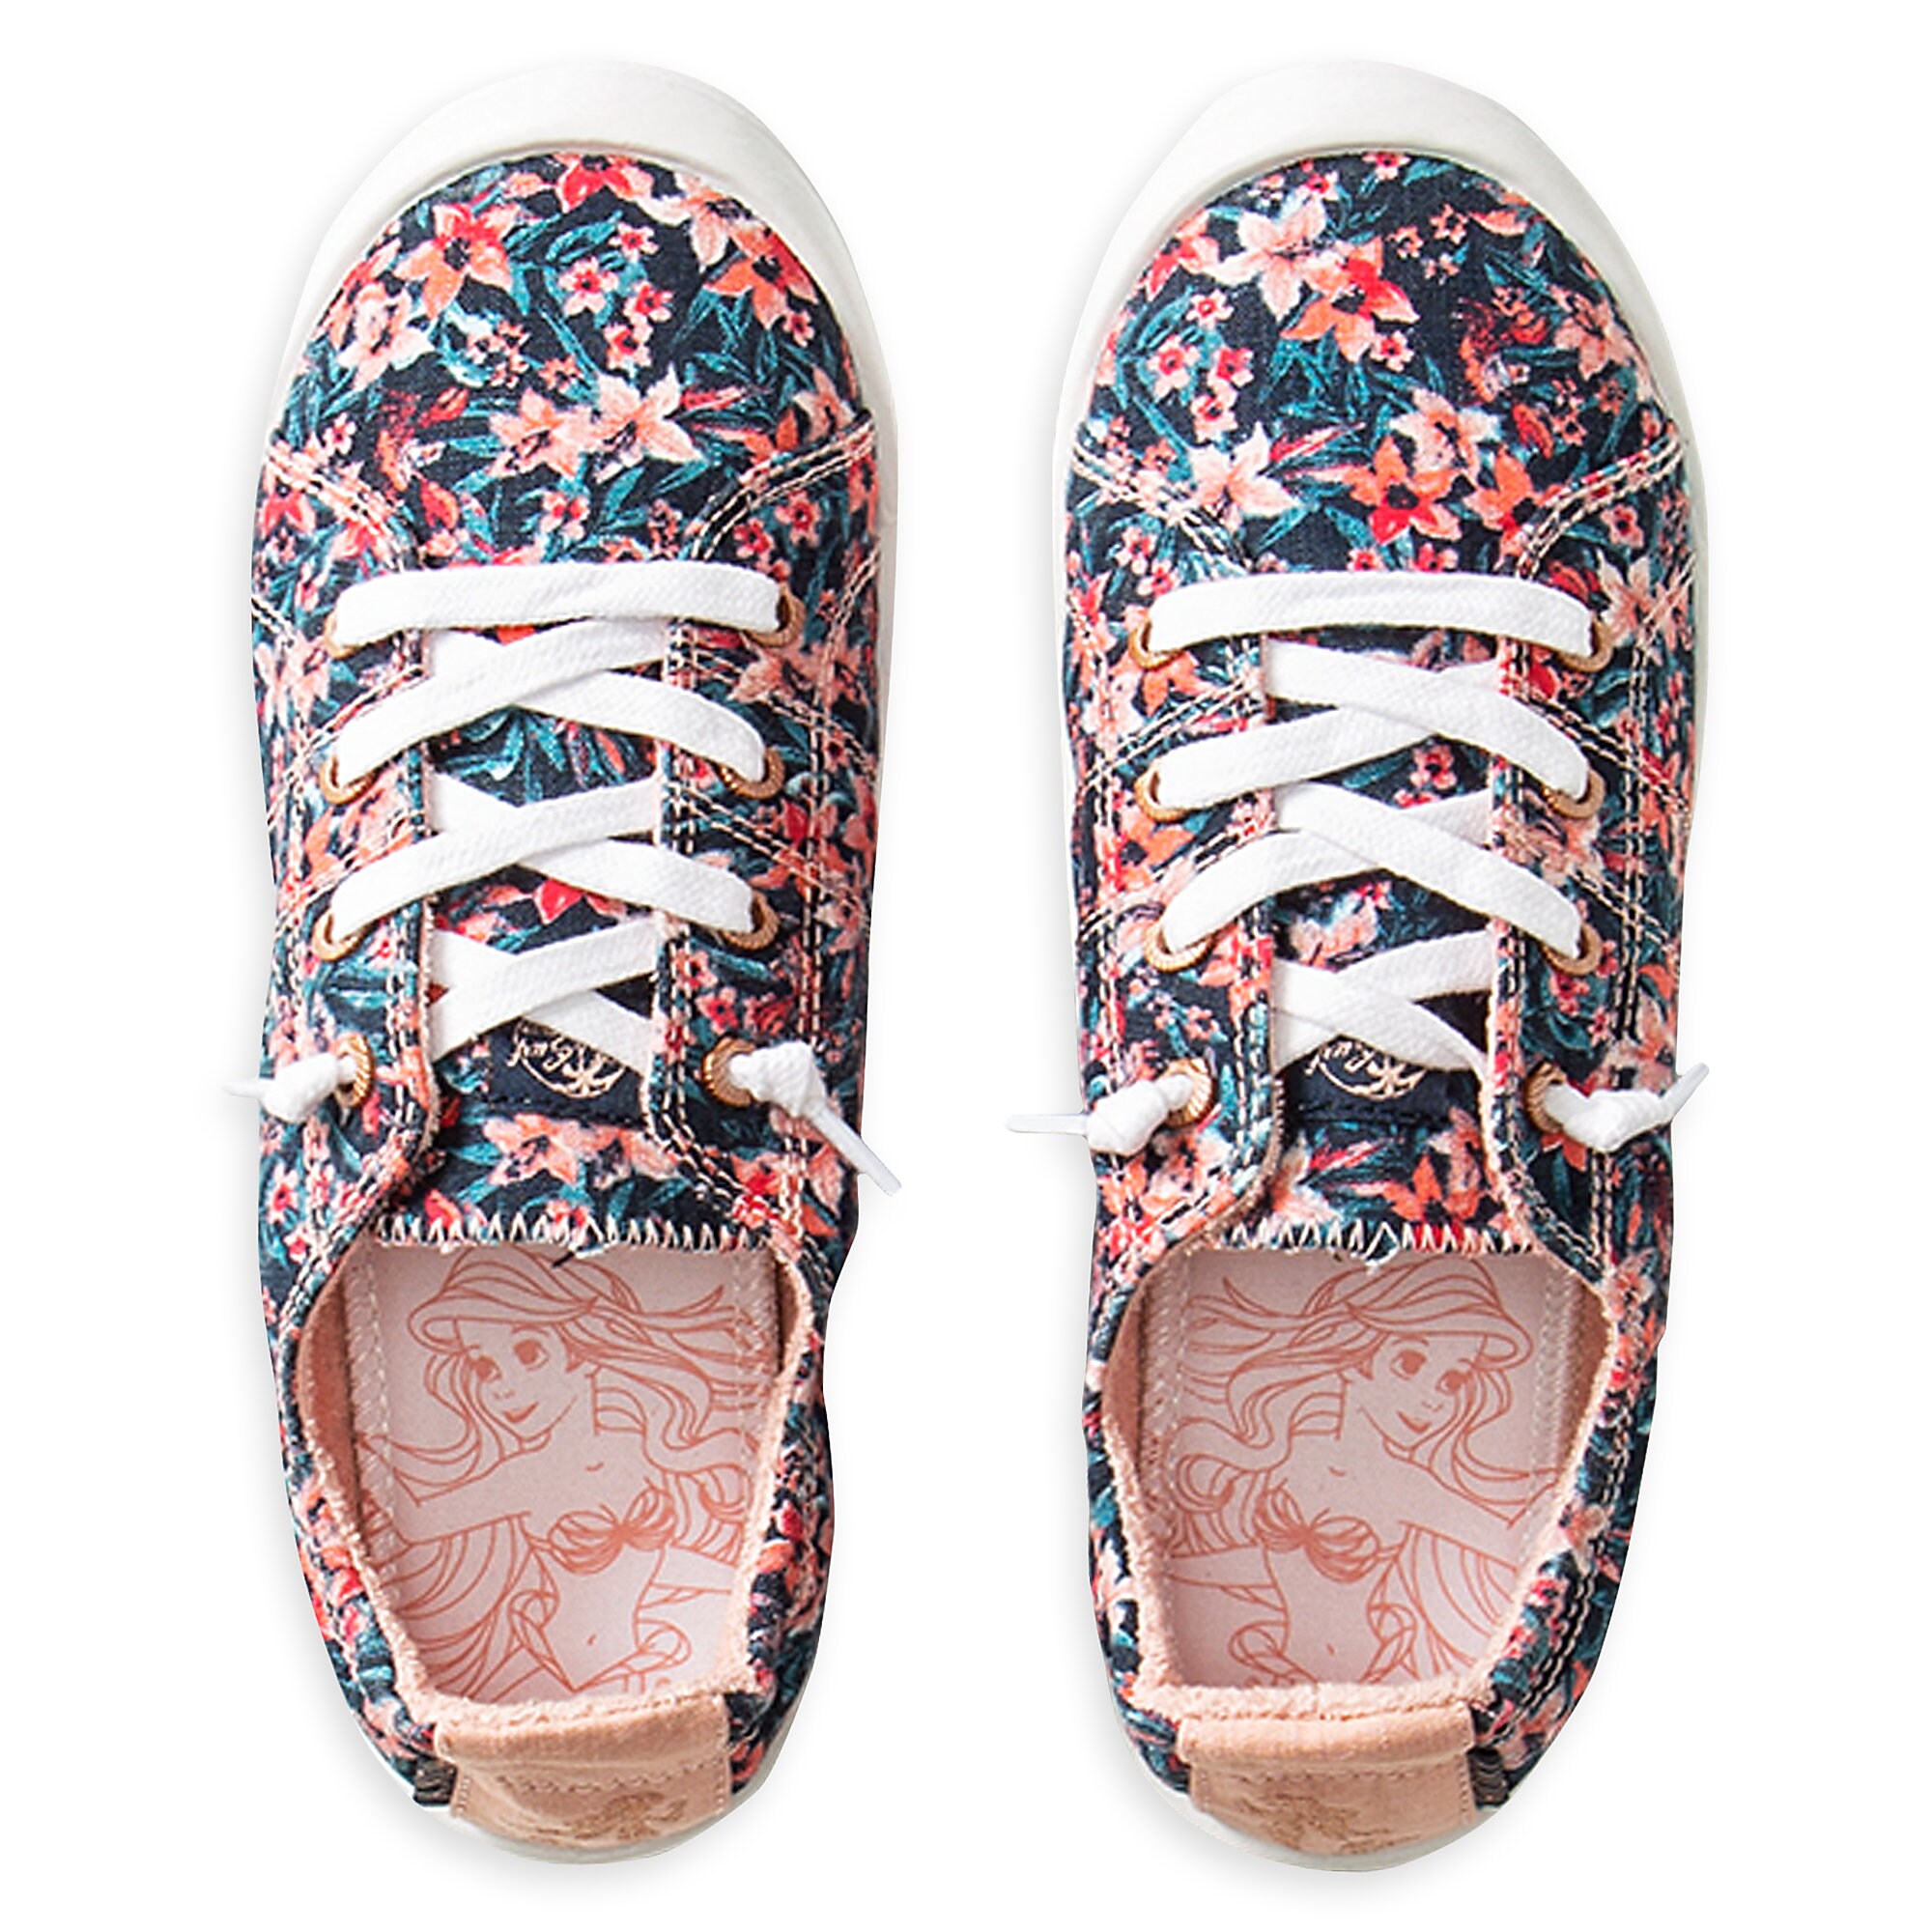 The Little Mermaid Canvas Shoes for Girls by ROXY Girl